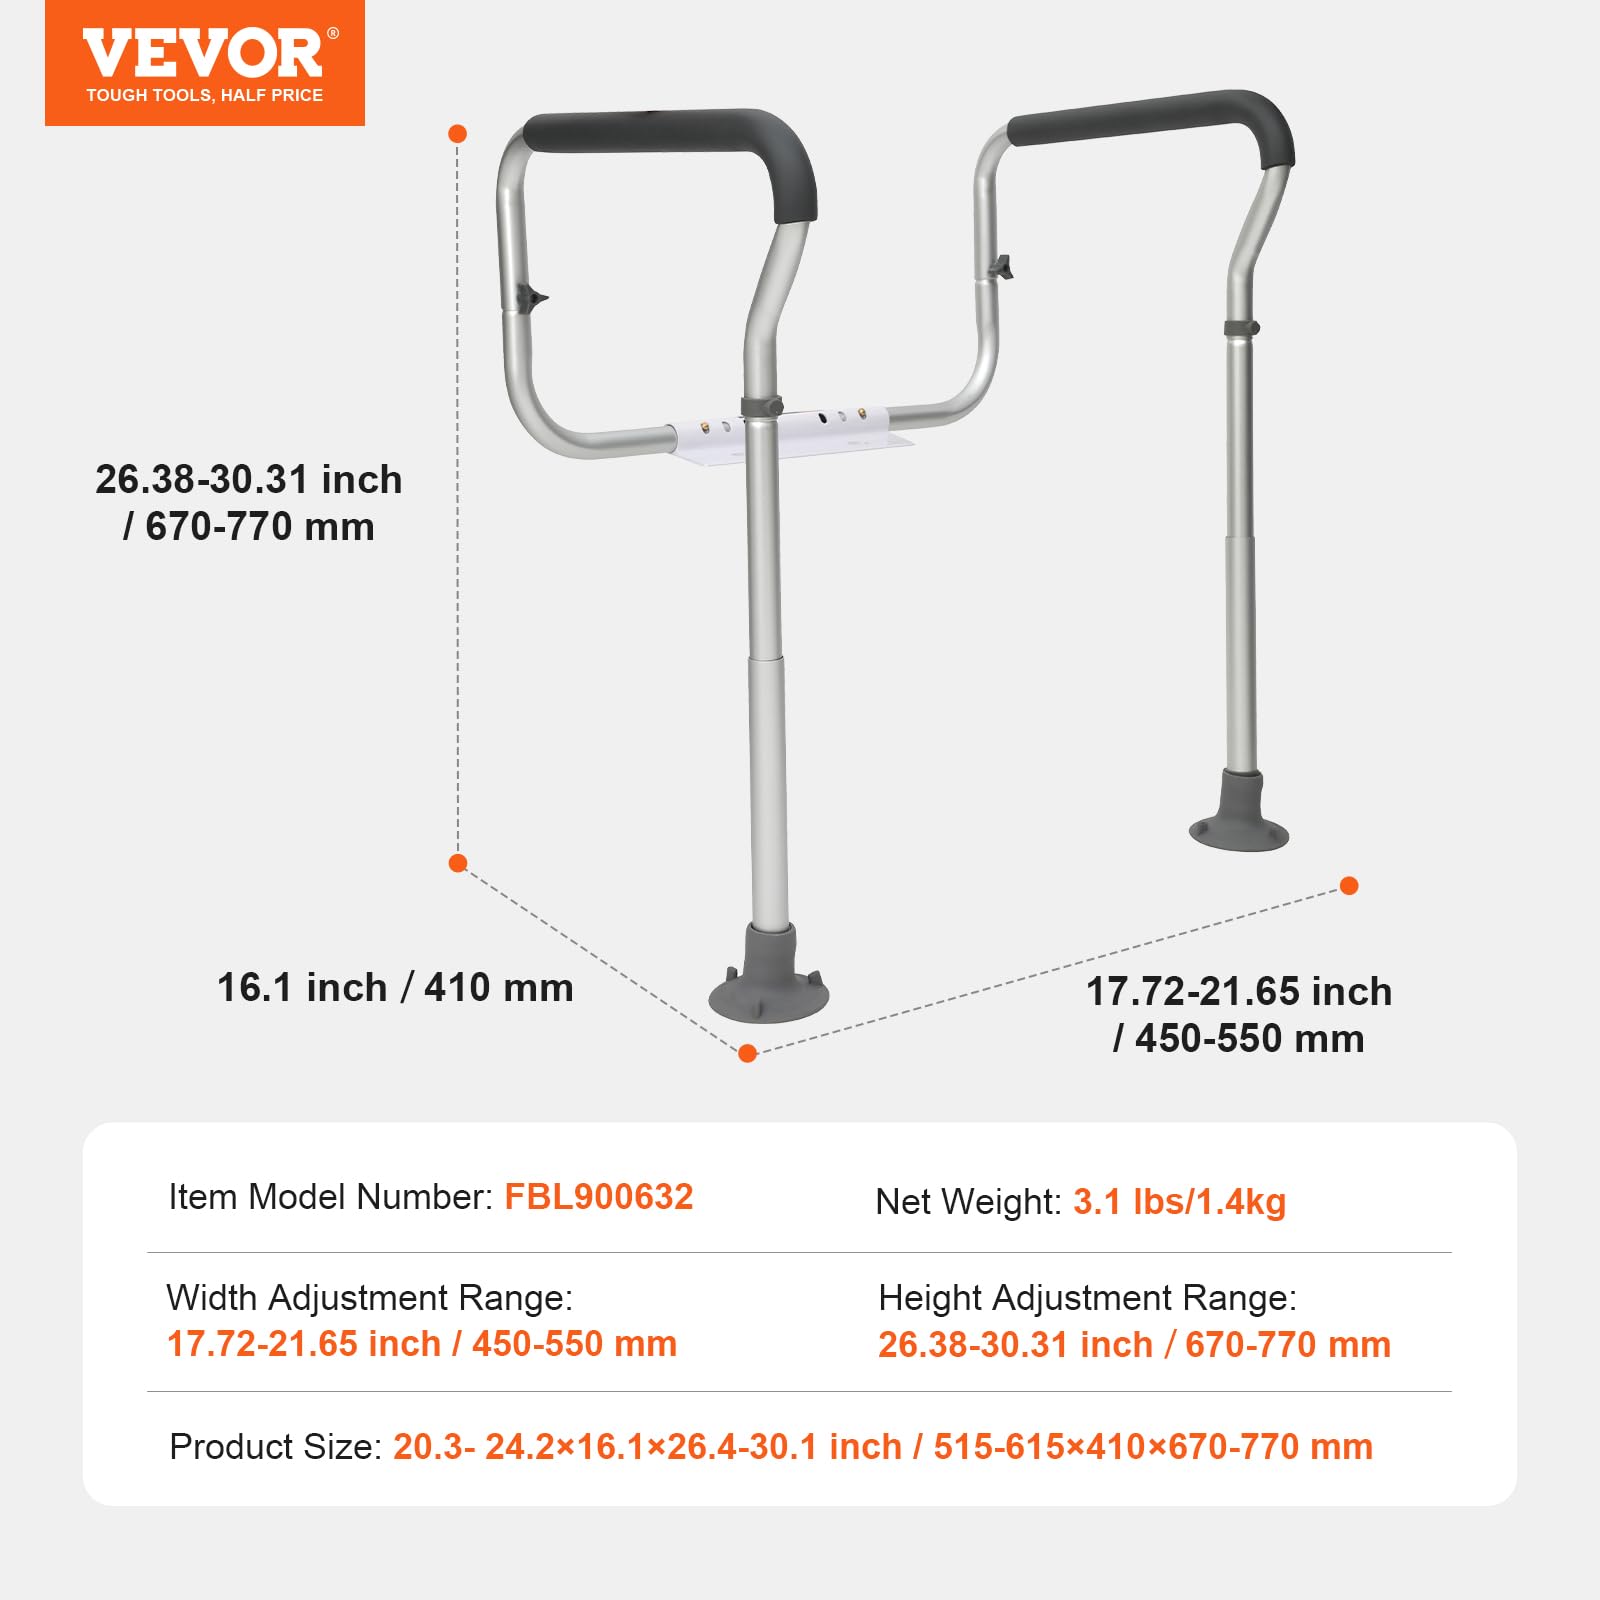 VEVOR Toilet Safety Rail, Bathroom Toilet Seat Safety Frame, Adjustable Width & Height Fit Most Toilets, 300lbs Capacity, Medical Toilet Handles with Padded Armrests for Handicap, Elderly, Disabled